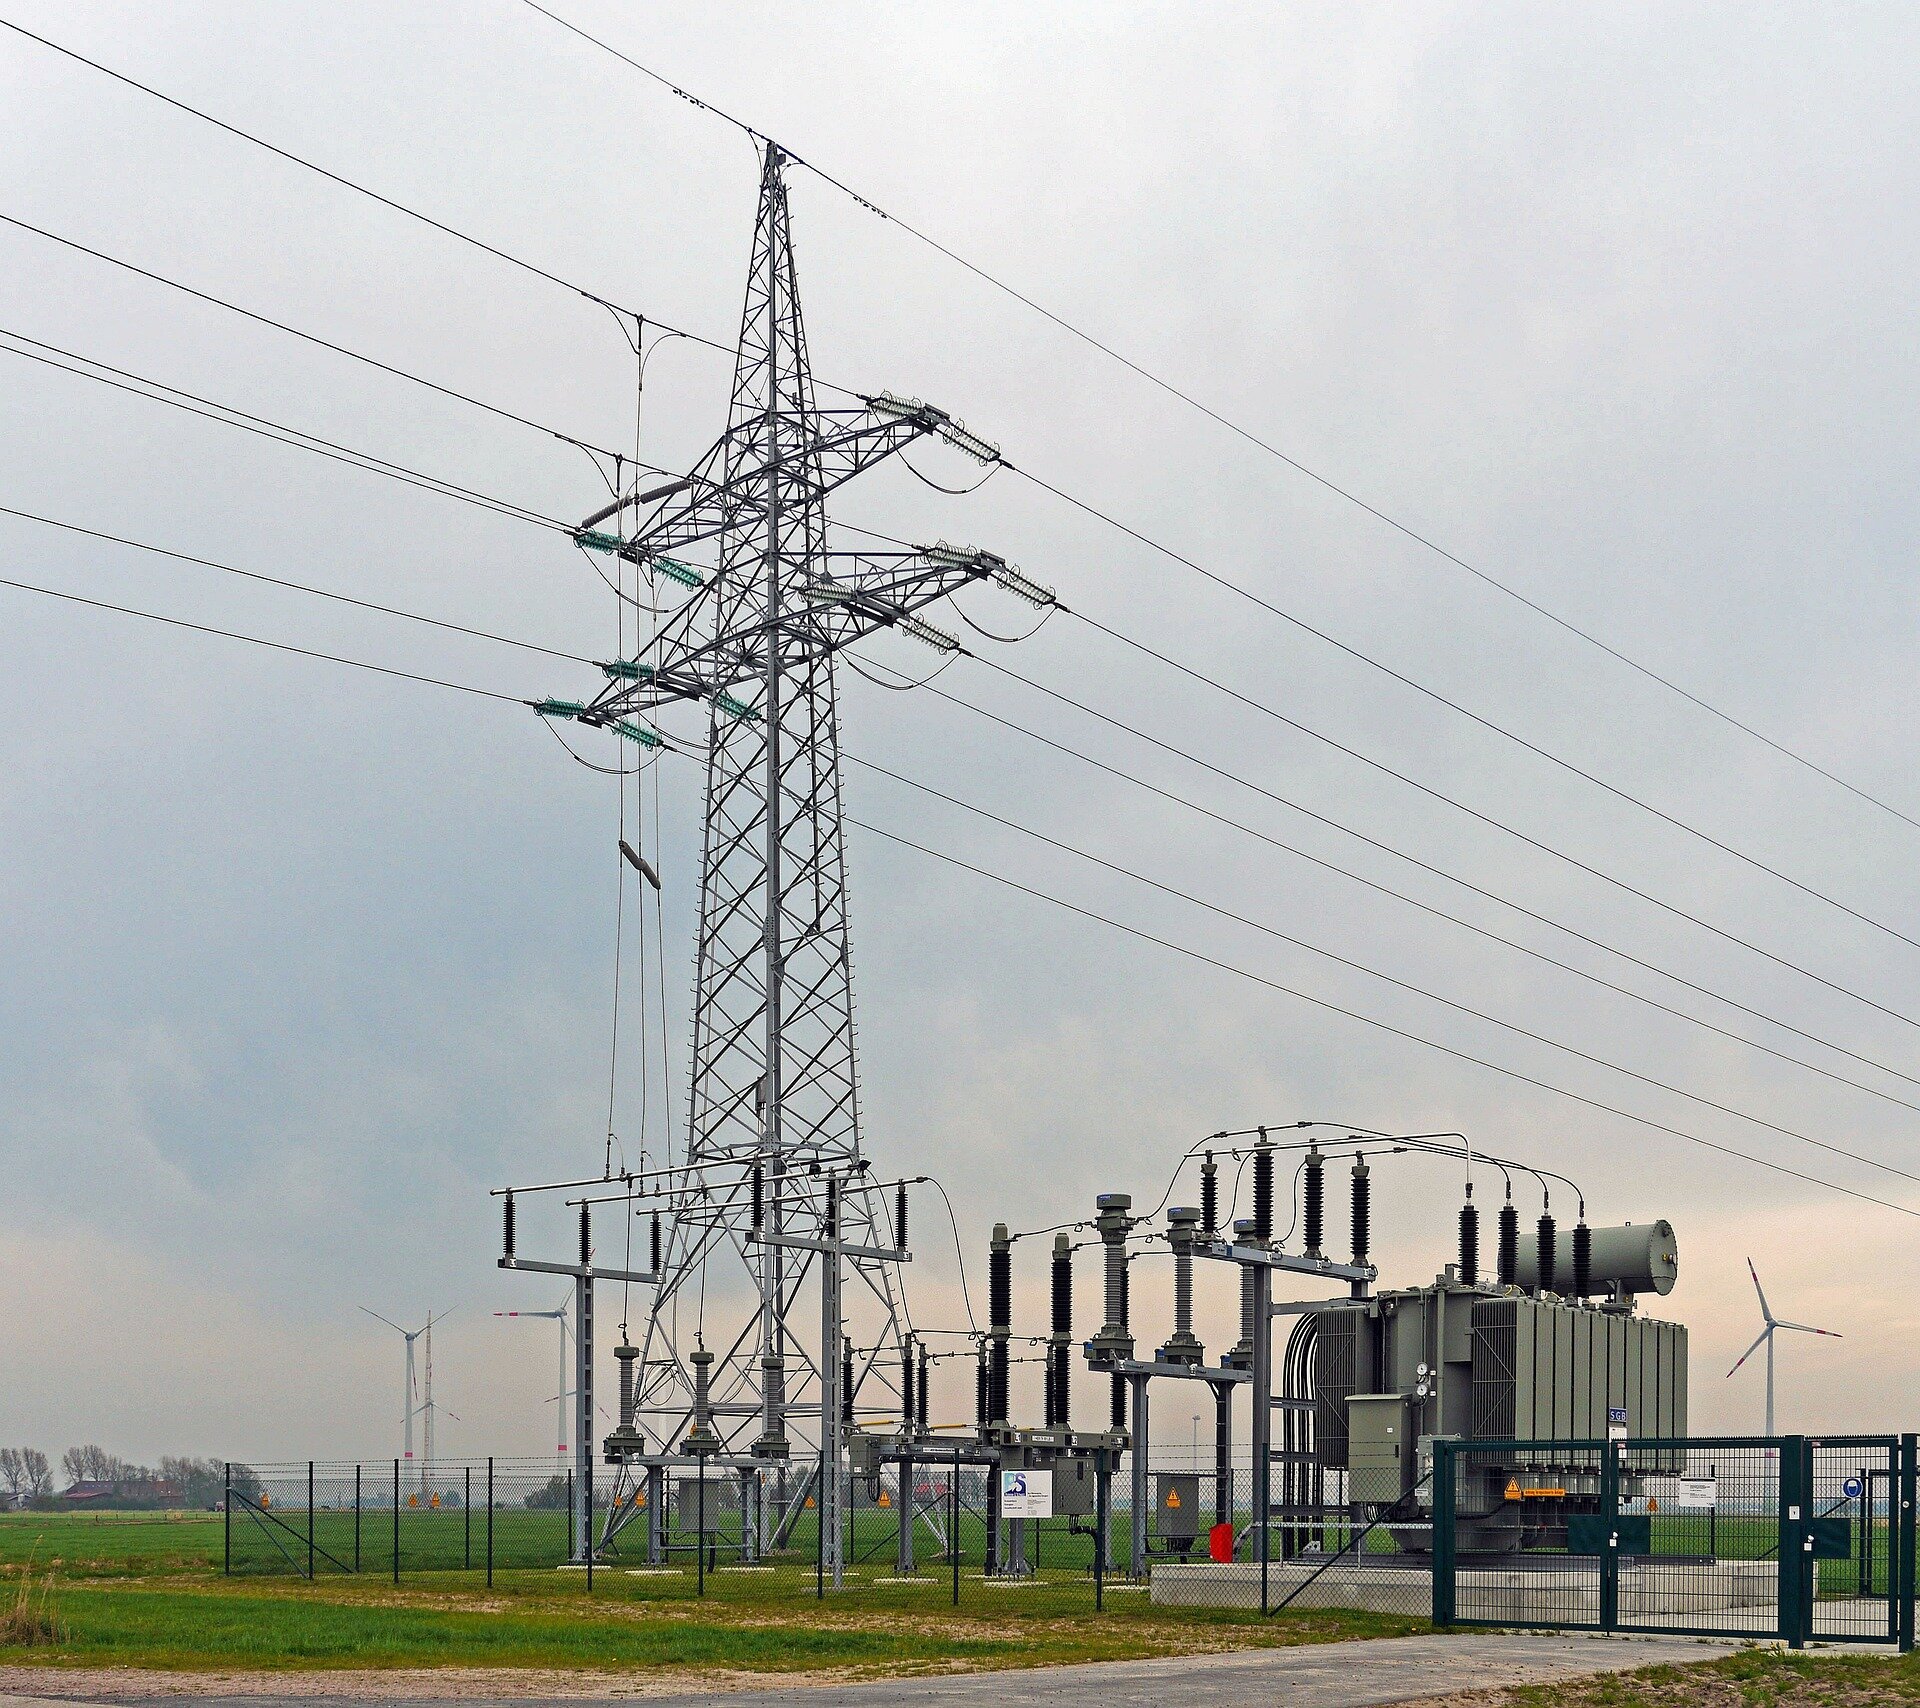 #Management strategy to mitigate power demand surges, increase grid reliability and reduce costs